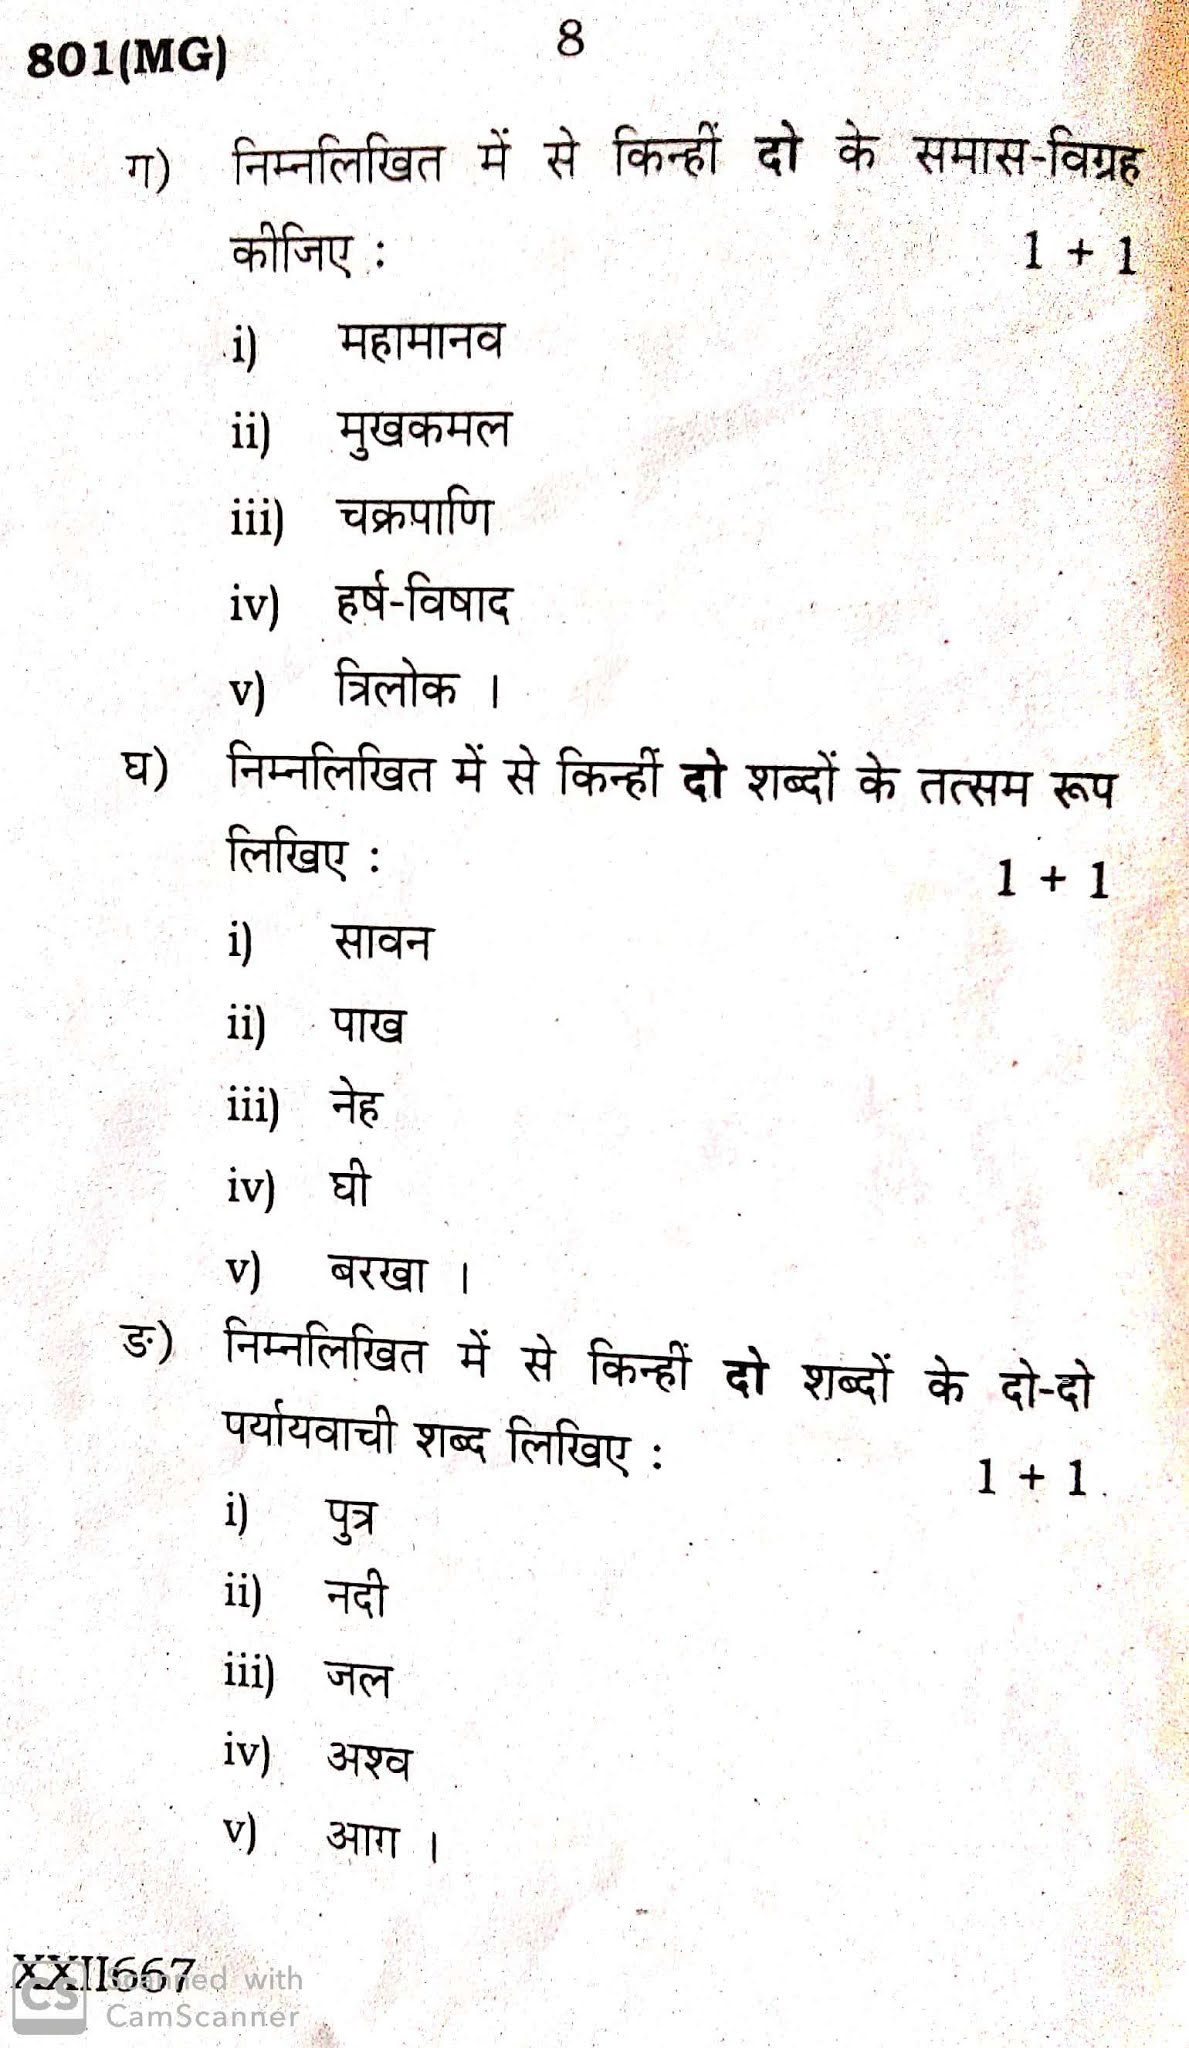 Hindi, UP Board Question paper for 10th (High school), 2020 Examination